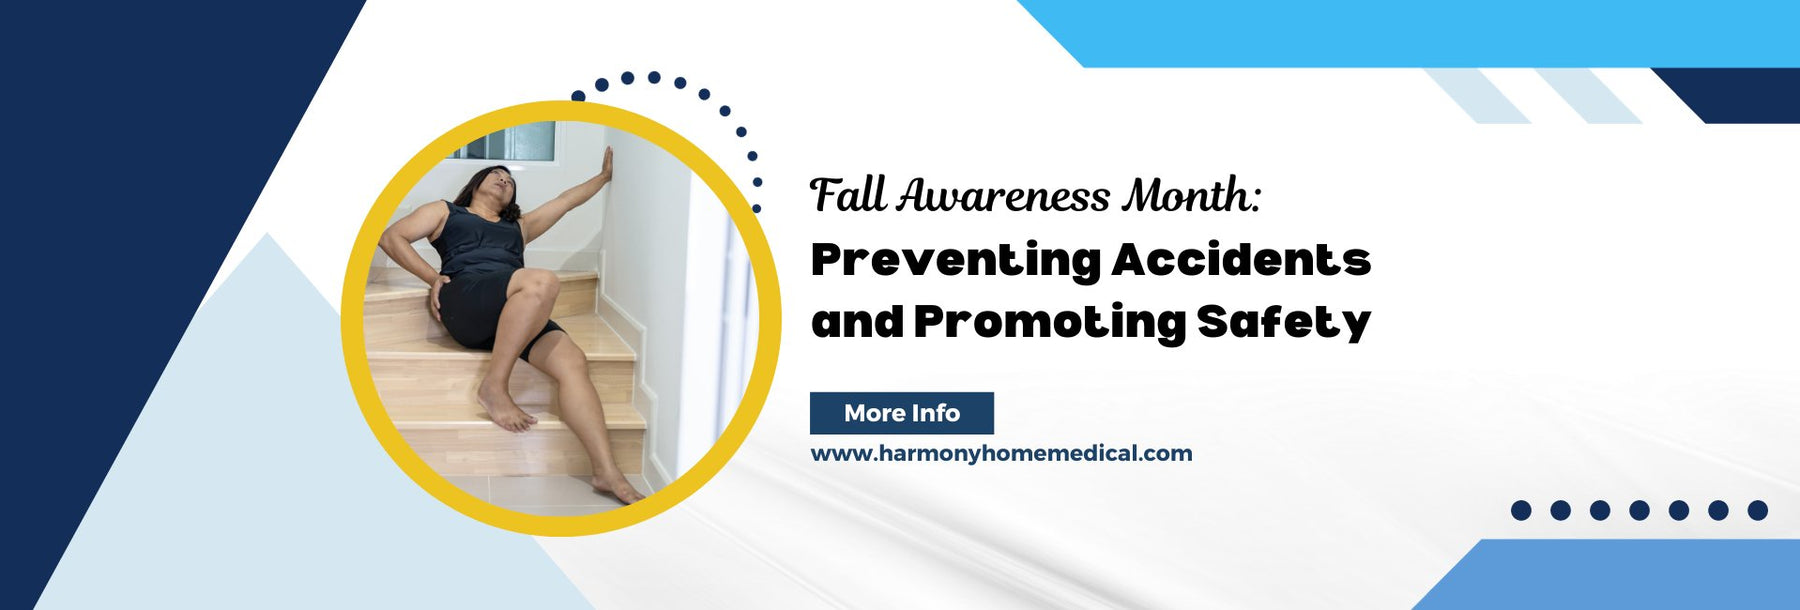 Fall Awareness Month: Preventing Accidents and Promoting Safety - Harmony Home Medical Supply